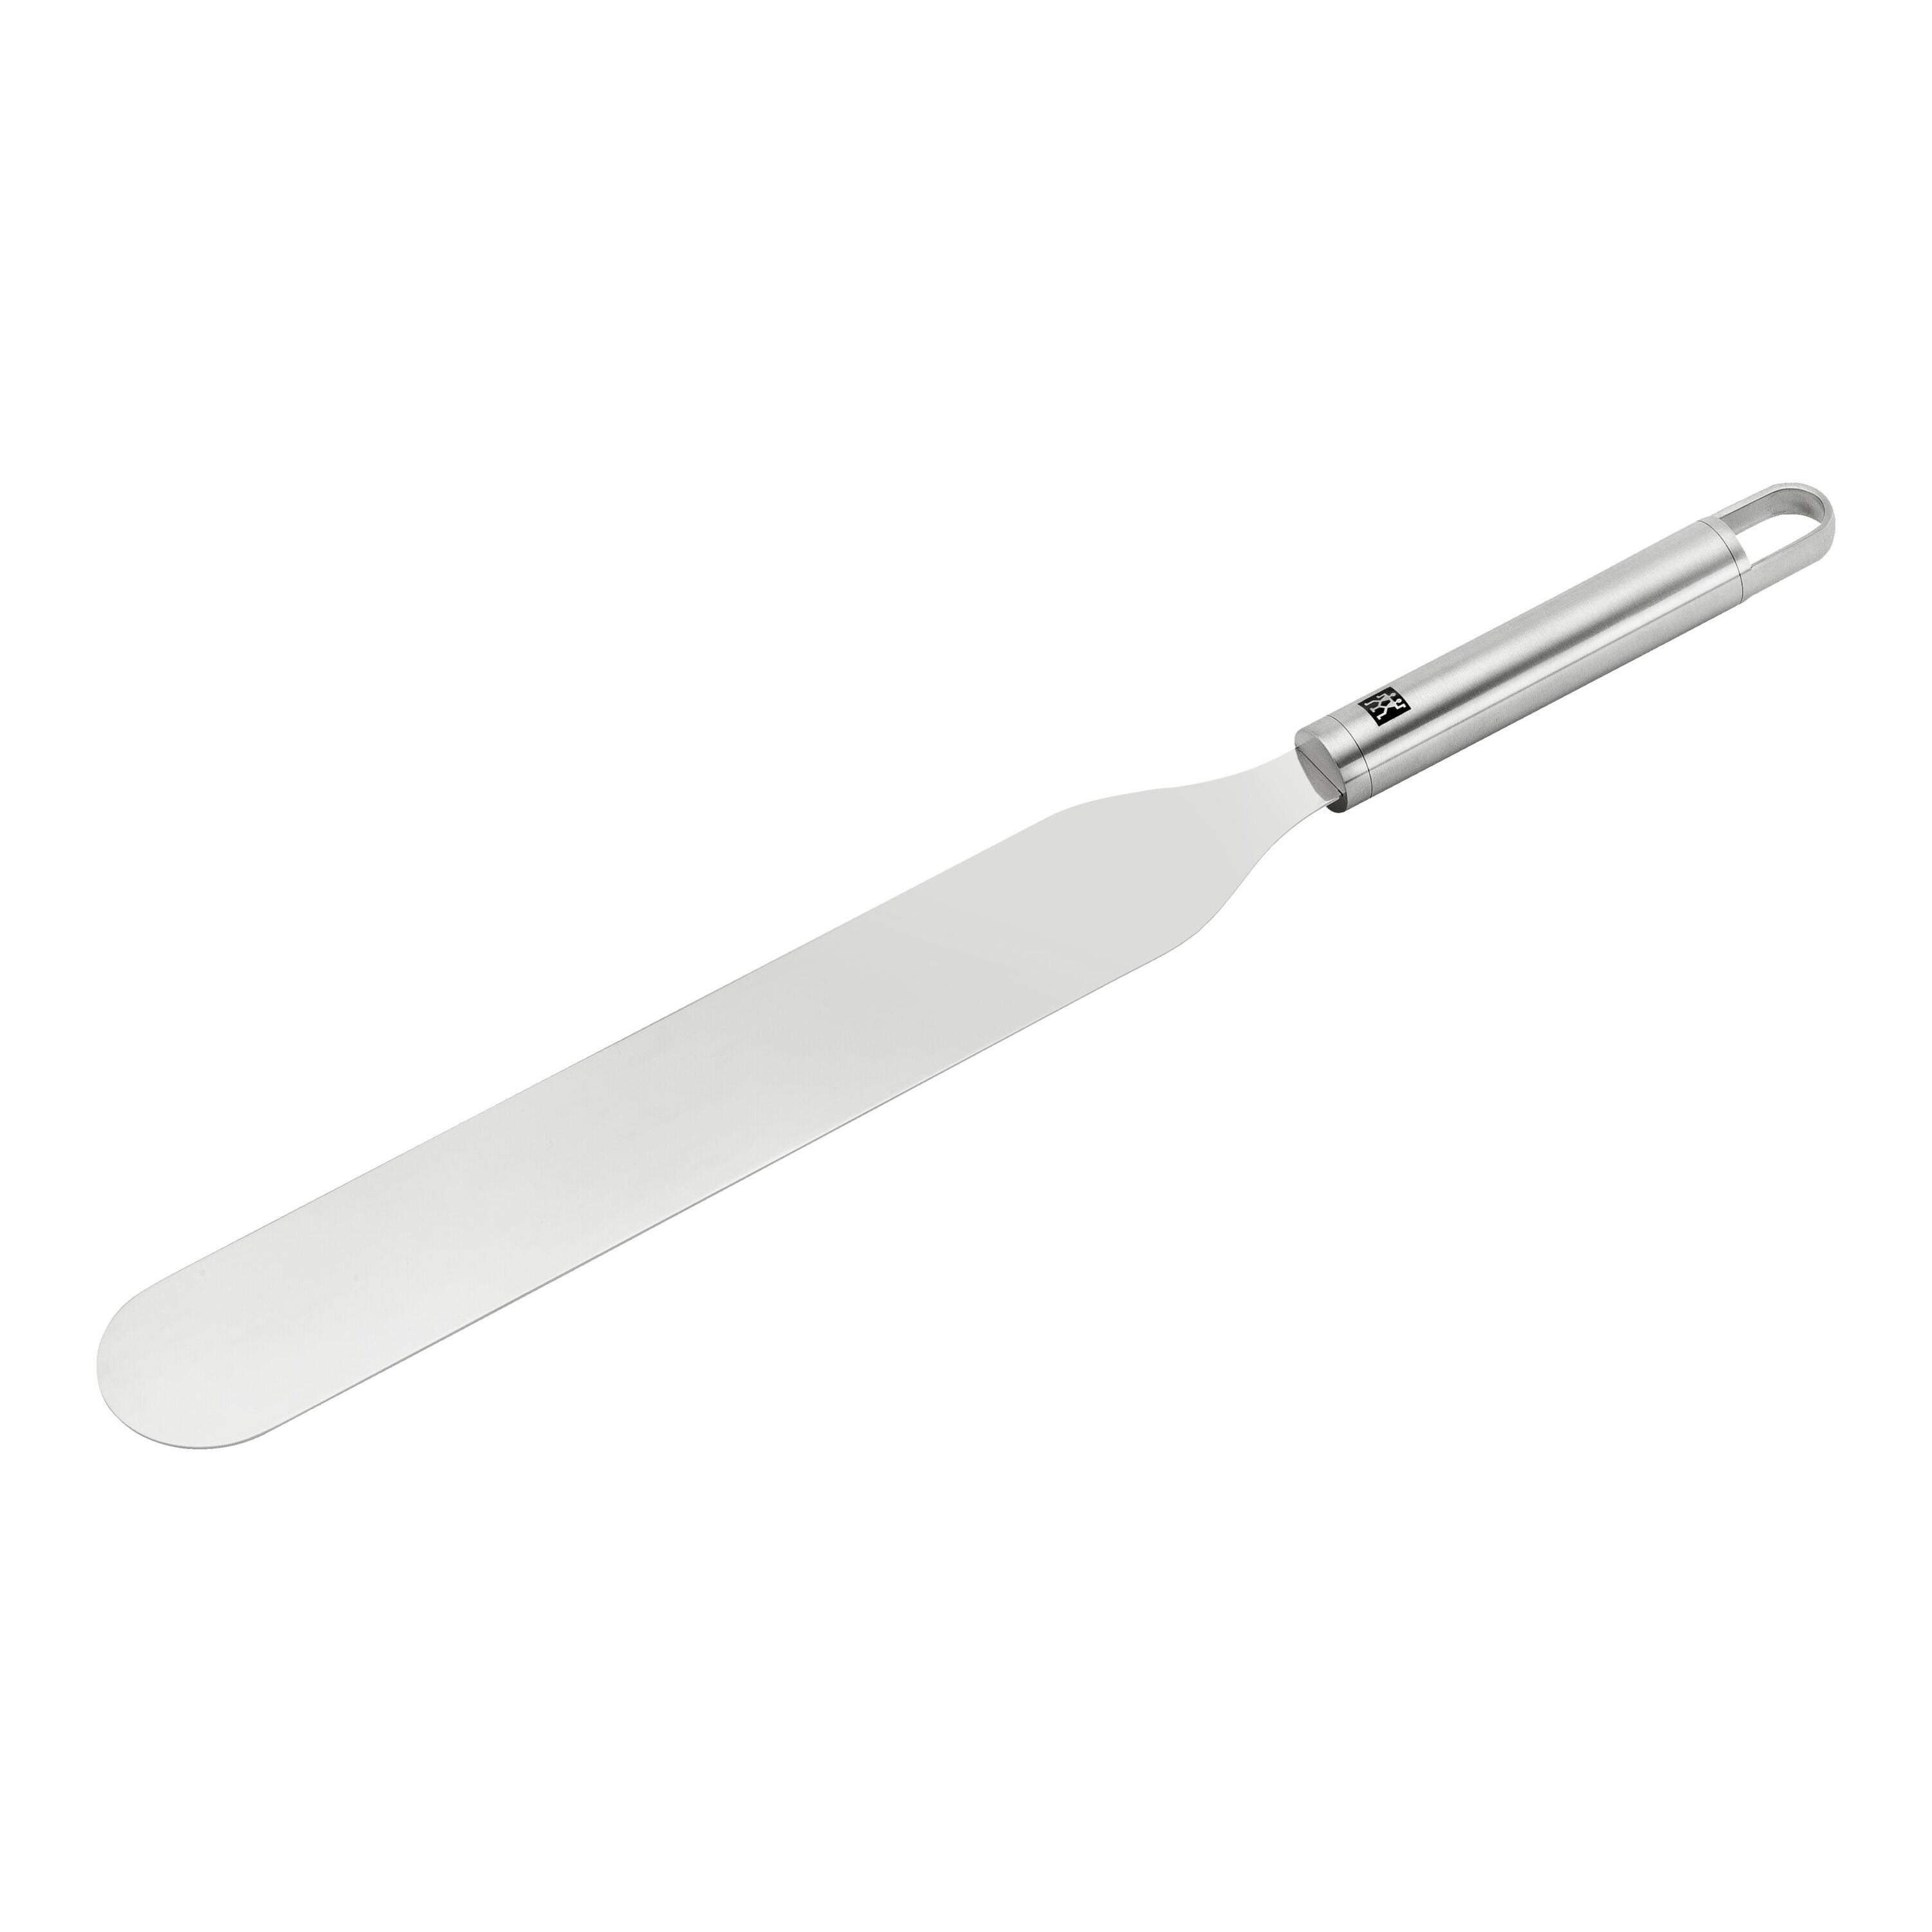 https://www.zwilling.com/on/demandware.static/-/Sites-zwilling-master-catalog/default/dw359faa27/images/large/37160-027-0_1.jpg